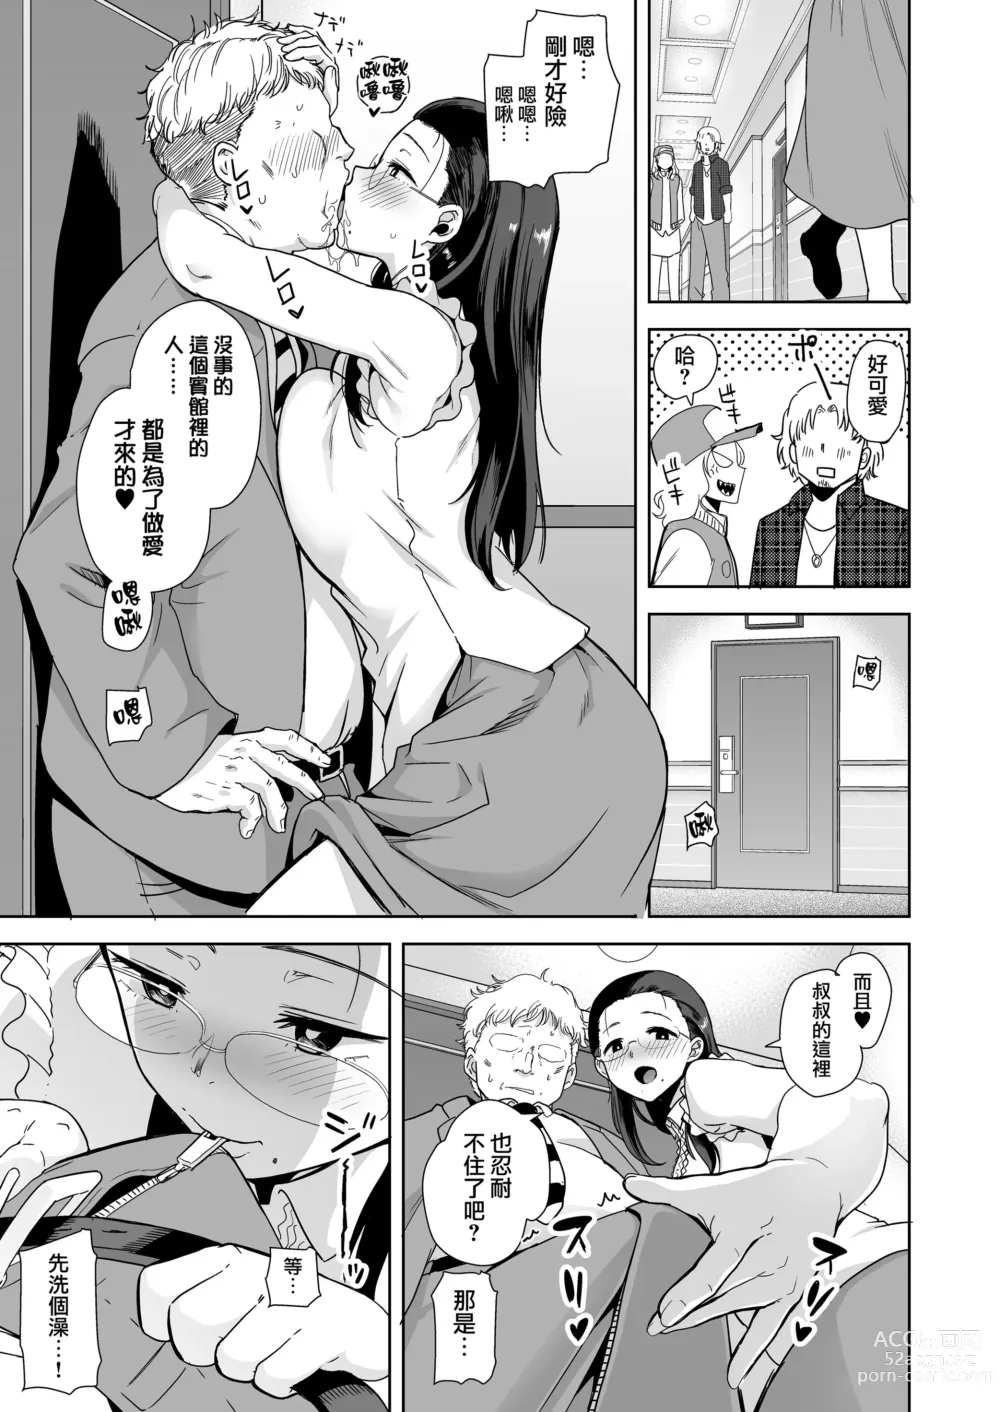 Page 8 of doujinshi 聖華女学院高等部公認竿おじさん1-6